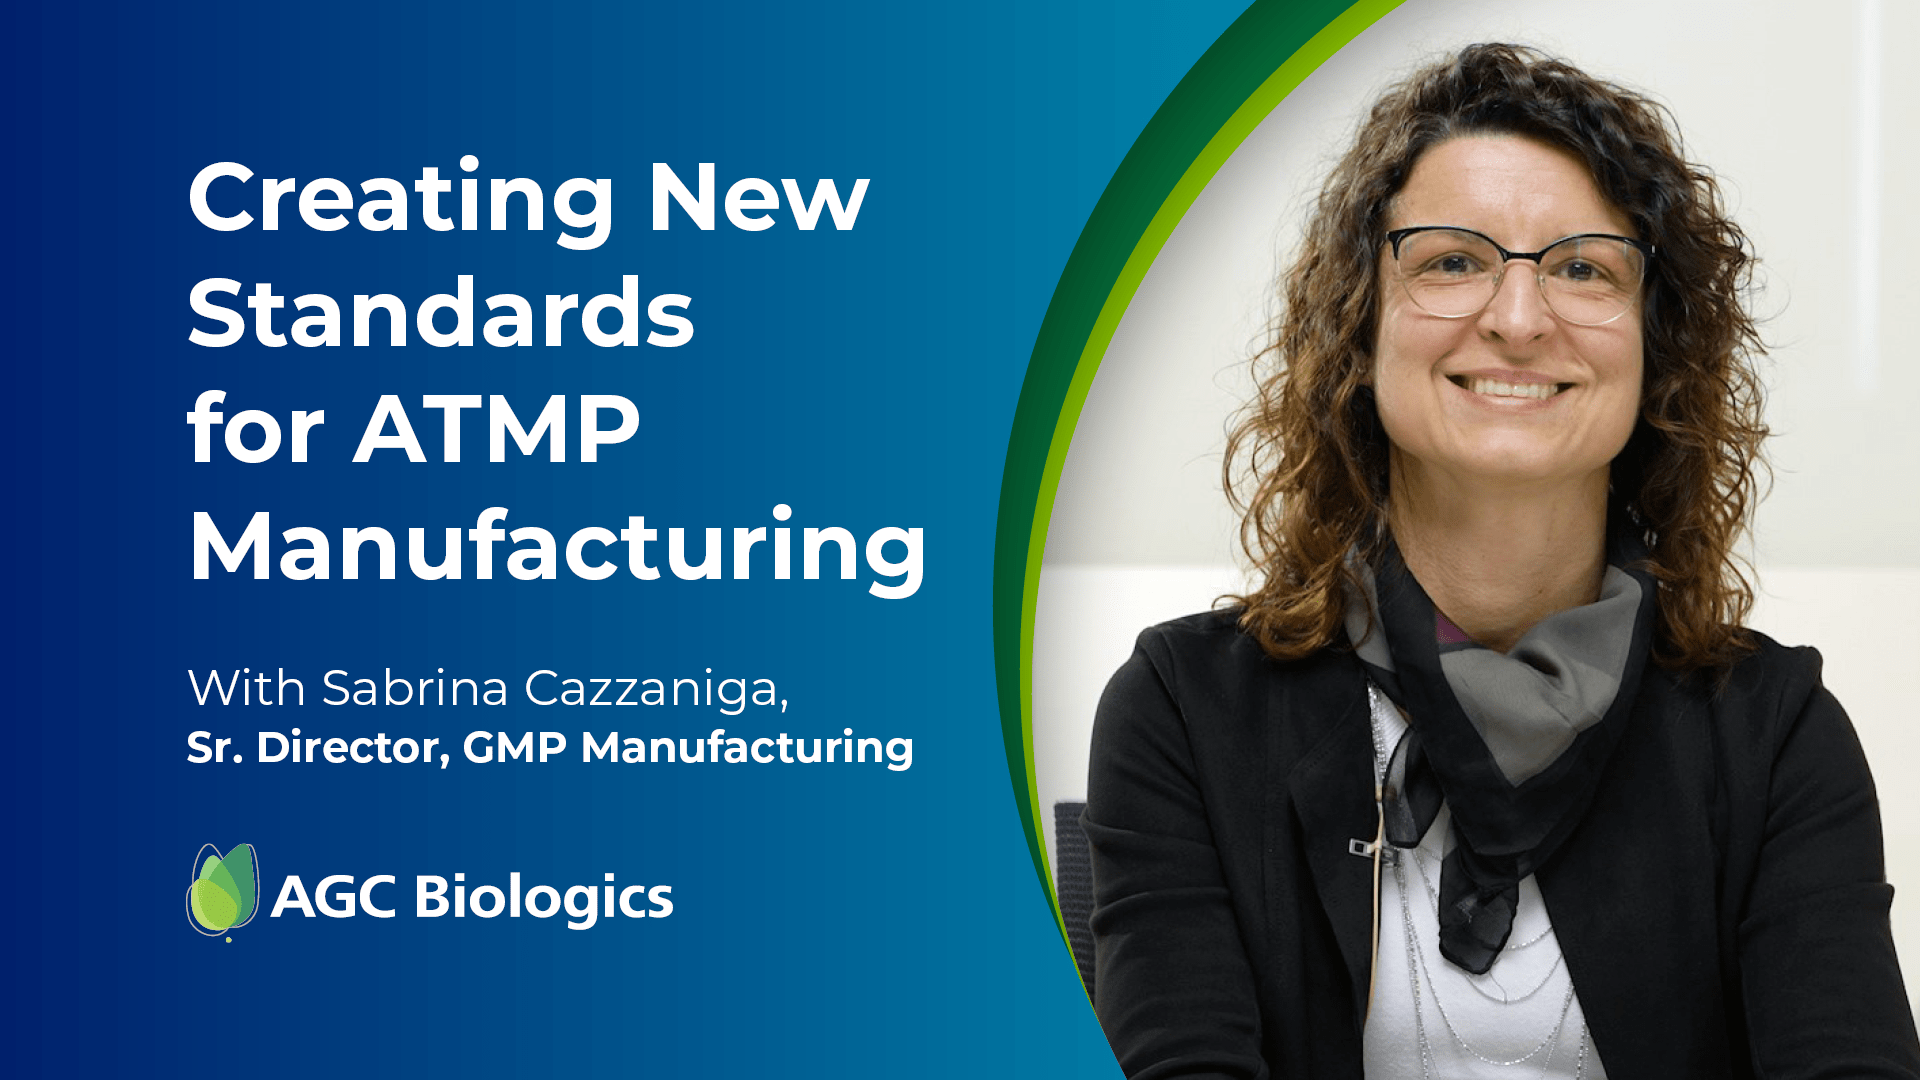 Creating New Standards for ATMP Manufacturing with Sabrina Cazzaniga